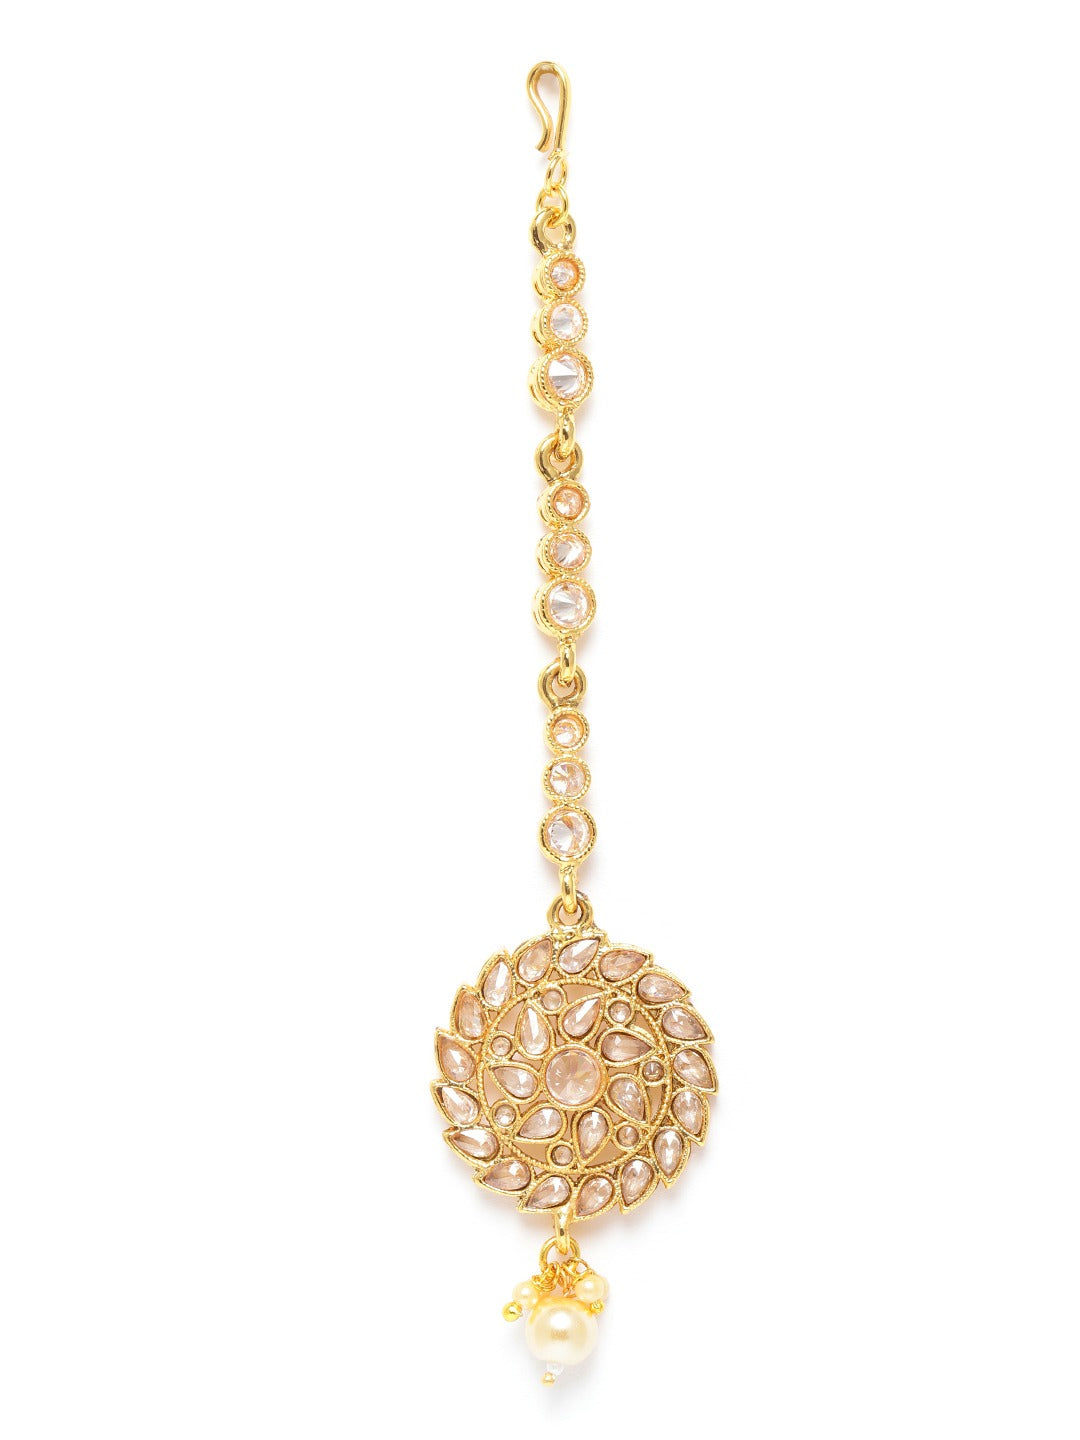 Off-White Gold-Plated Stone-Studded & Beaded Floral Shaped Maang Tika